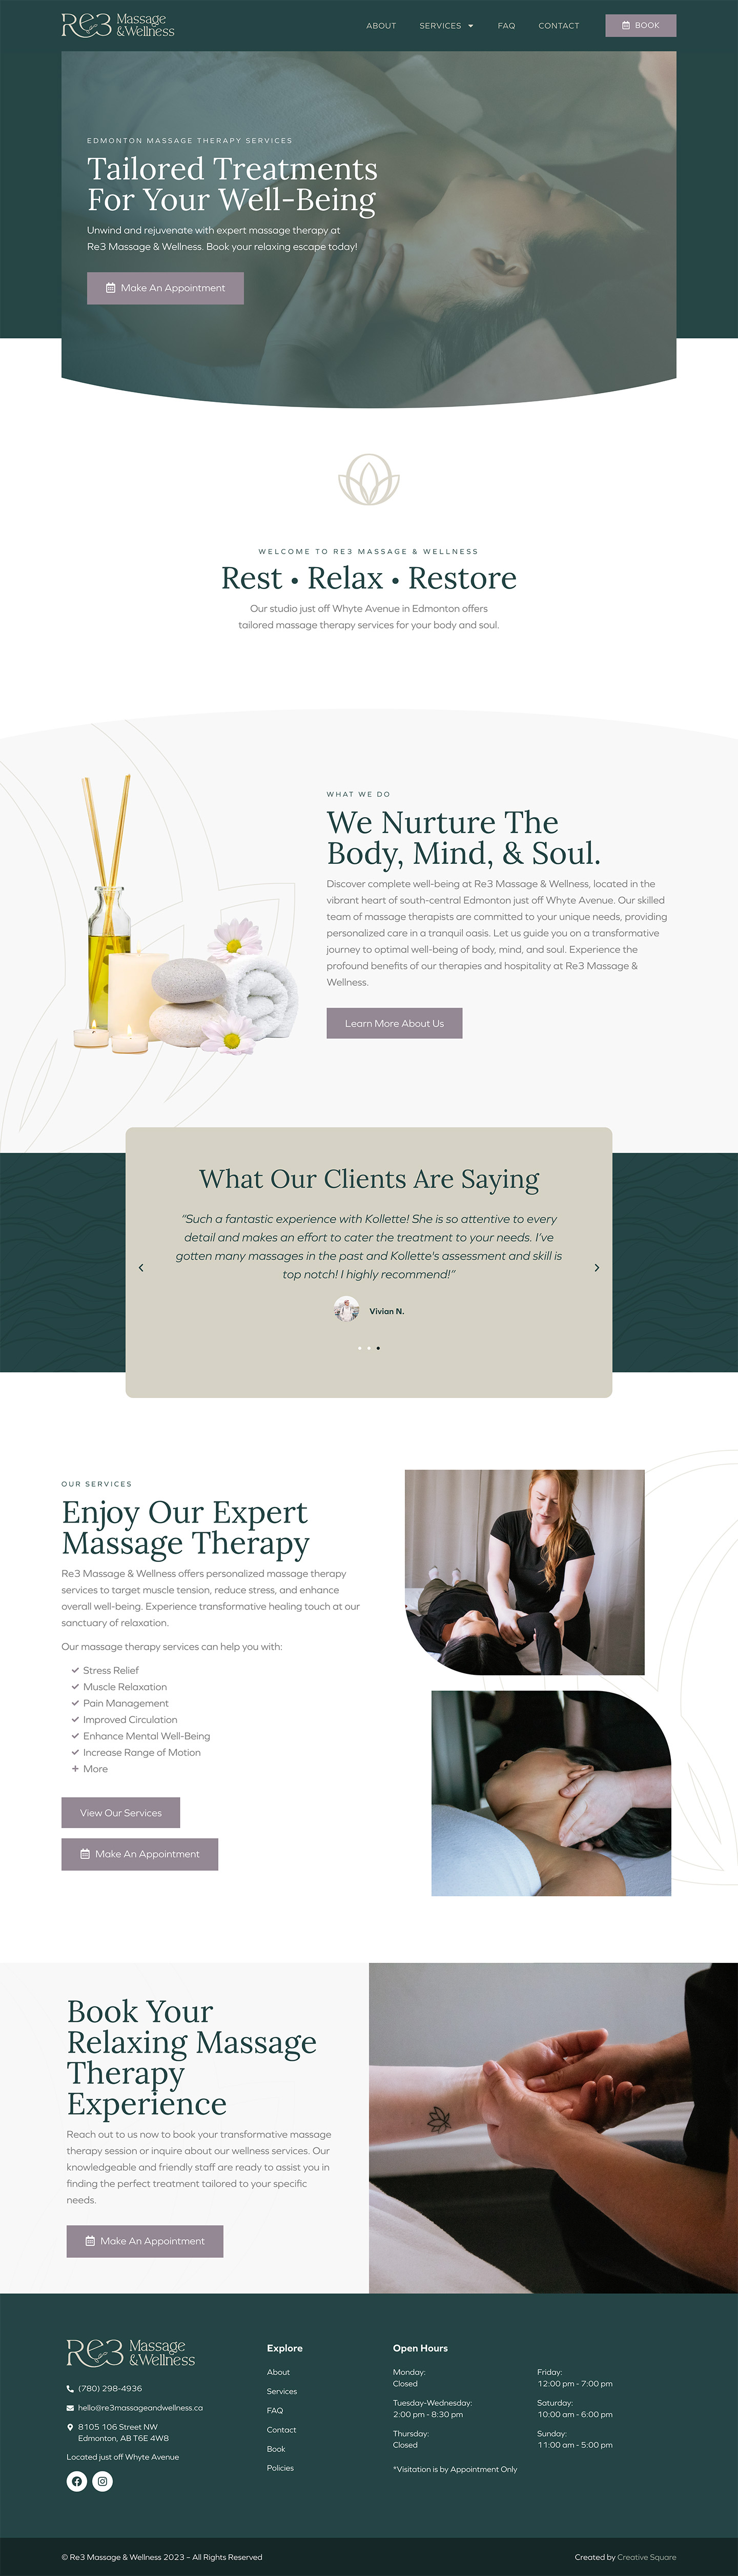 Re3 Massage and Wellness Website Preview 1